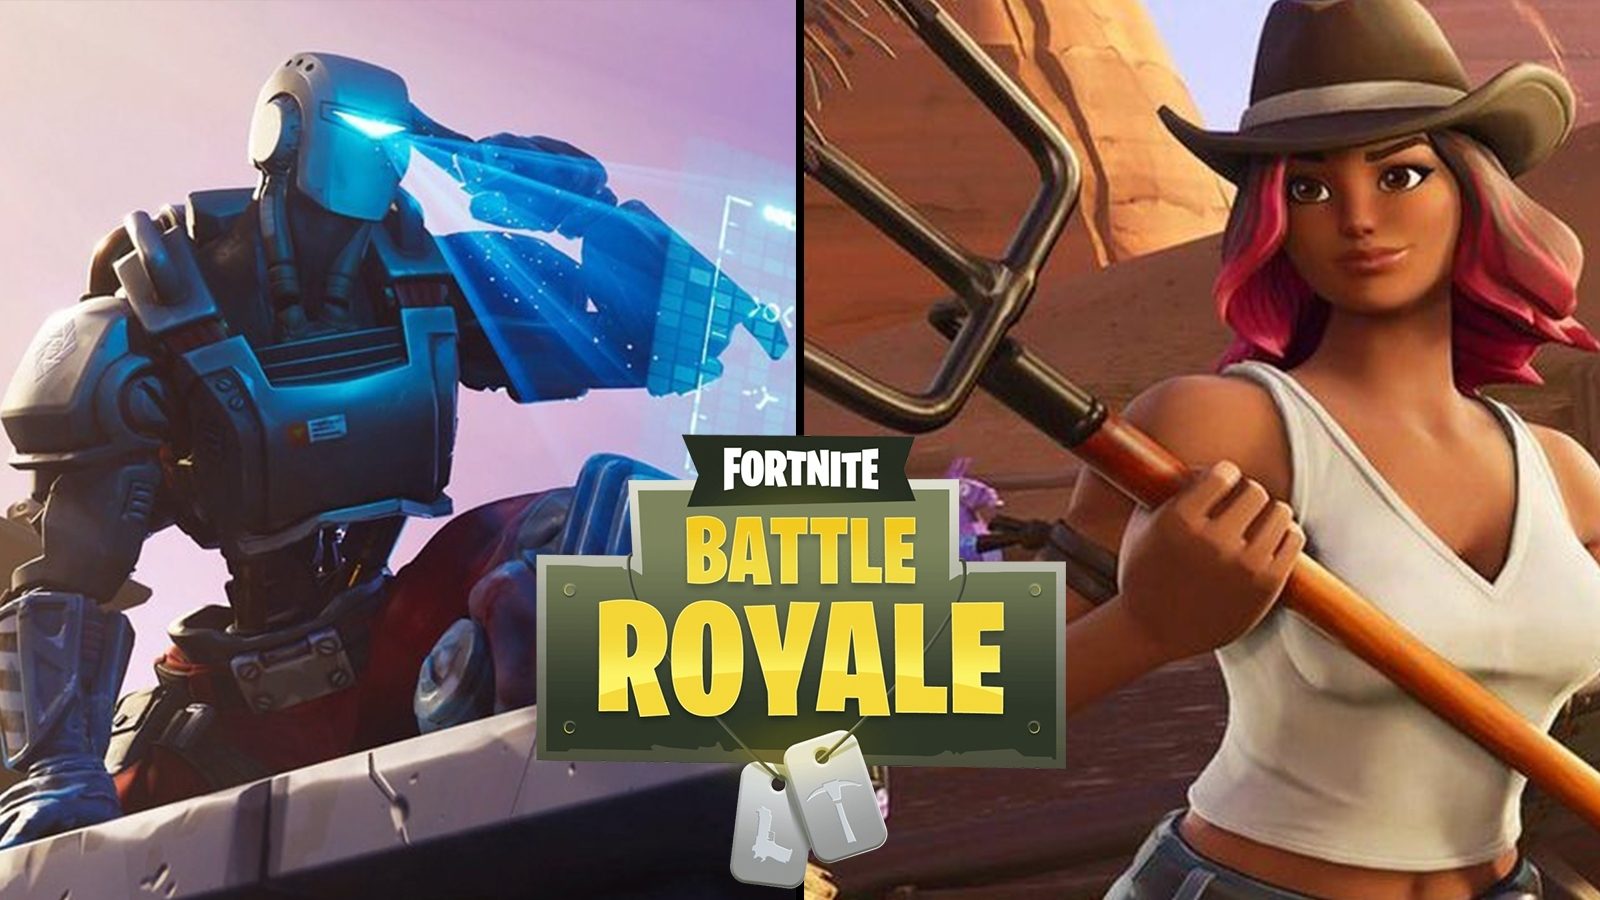 Heres every Fortnite skin released during the Season Battle